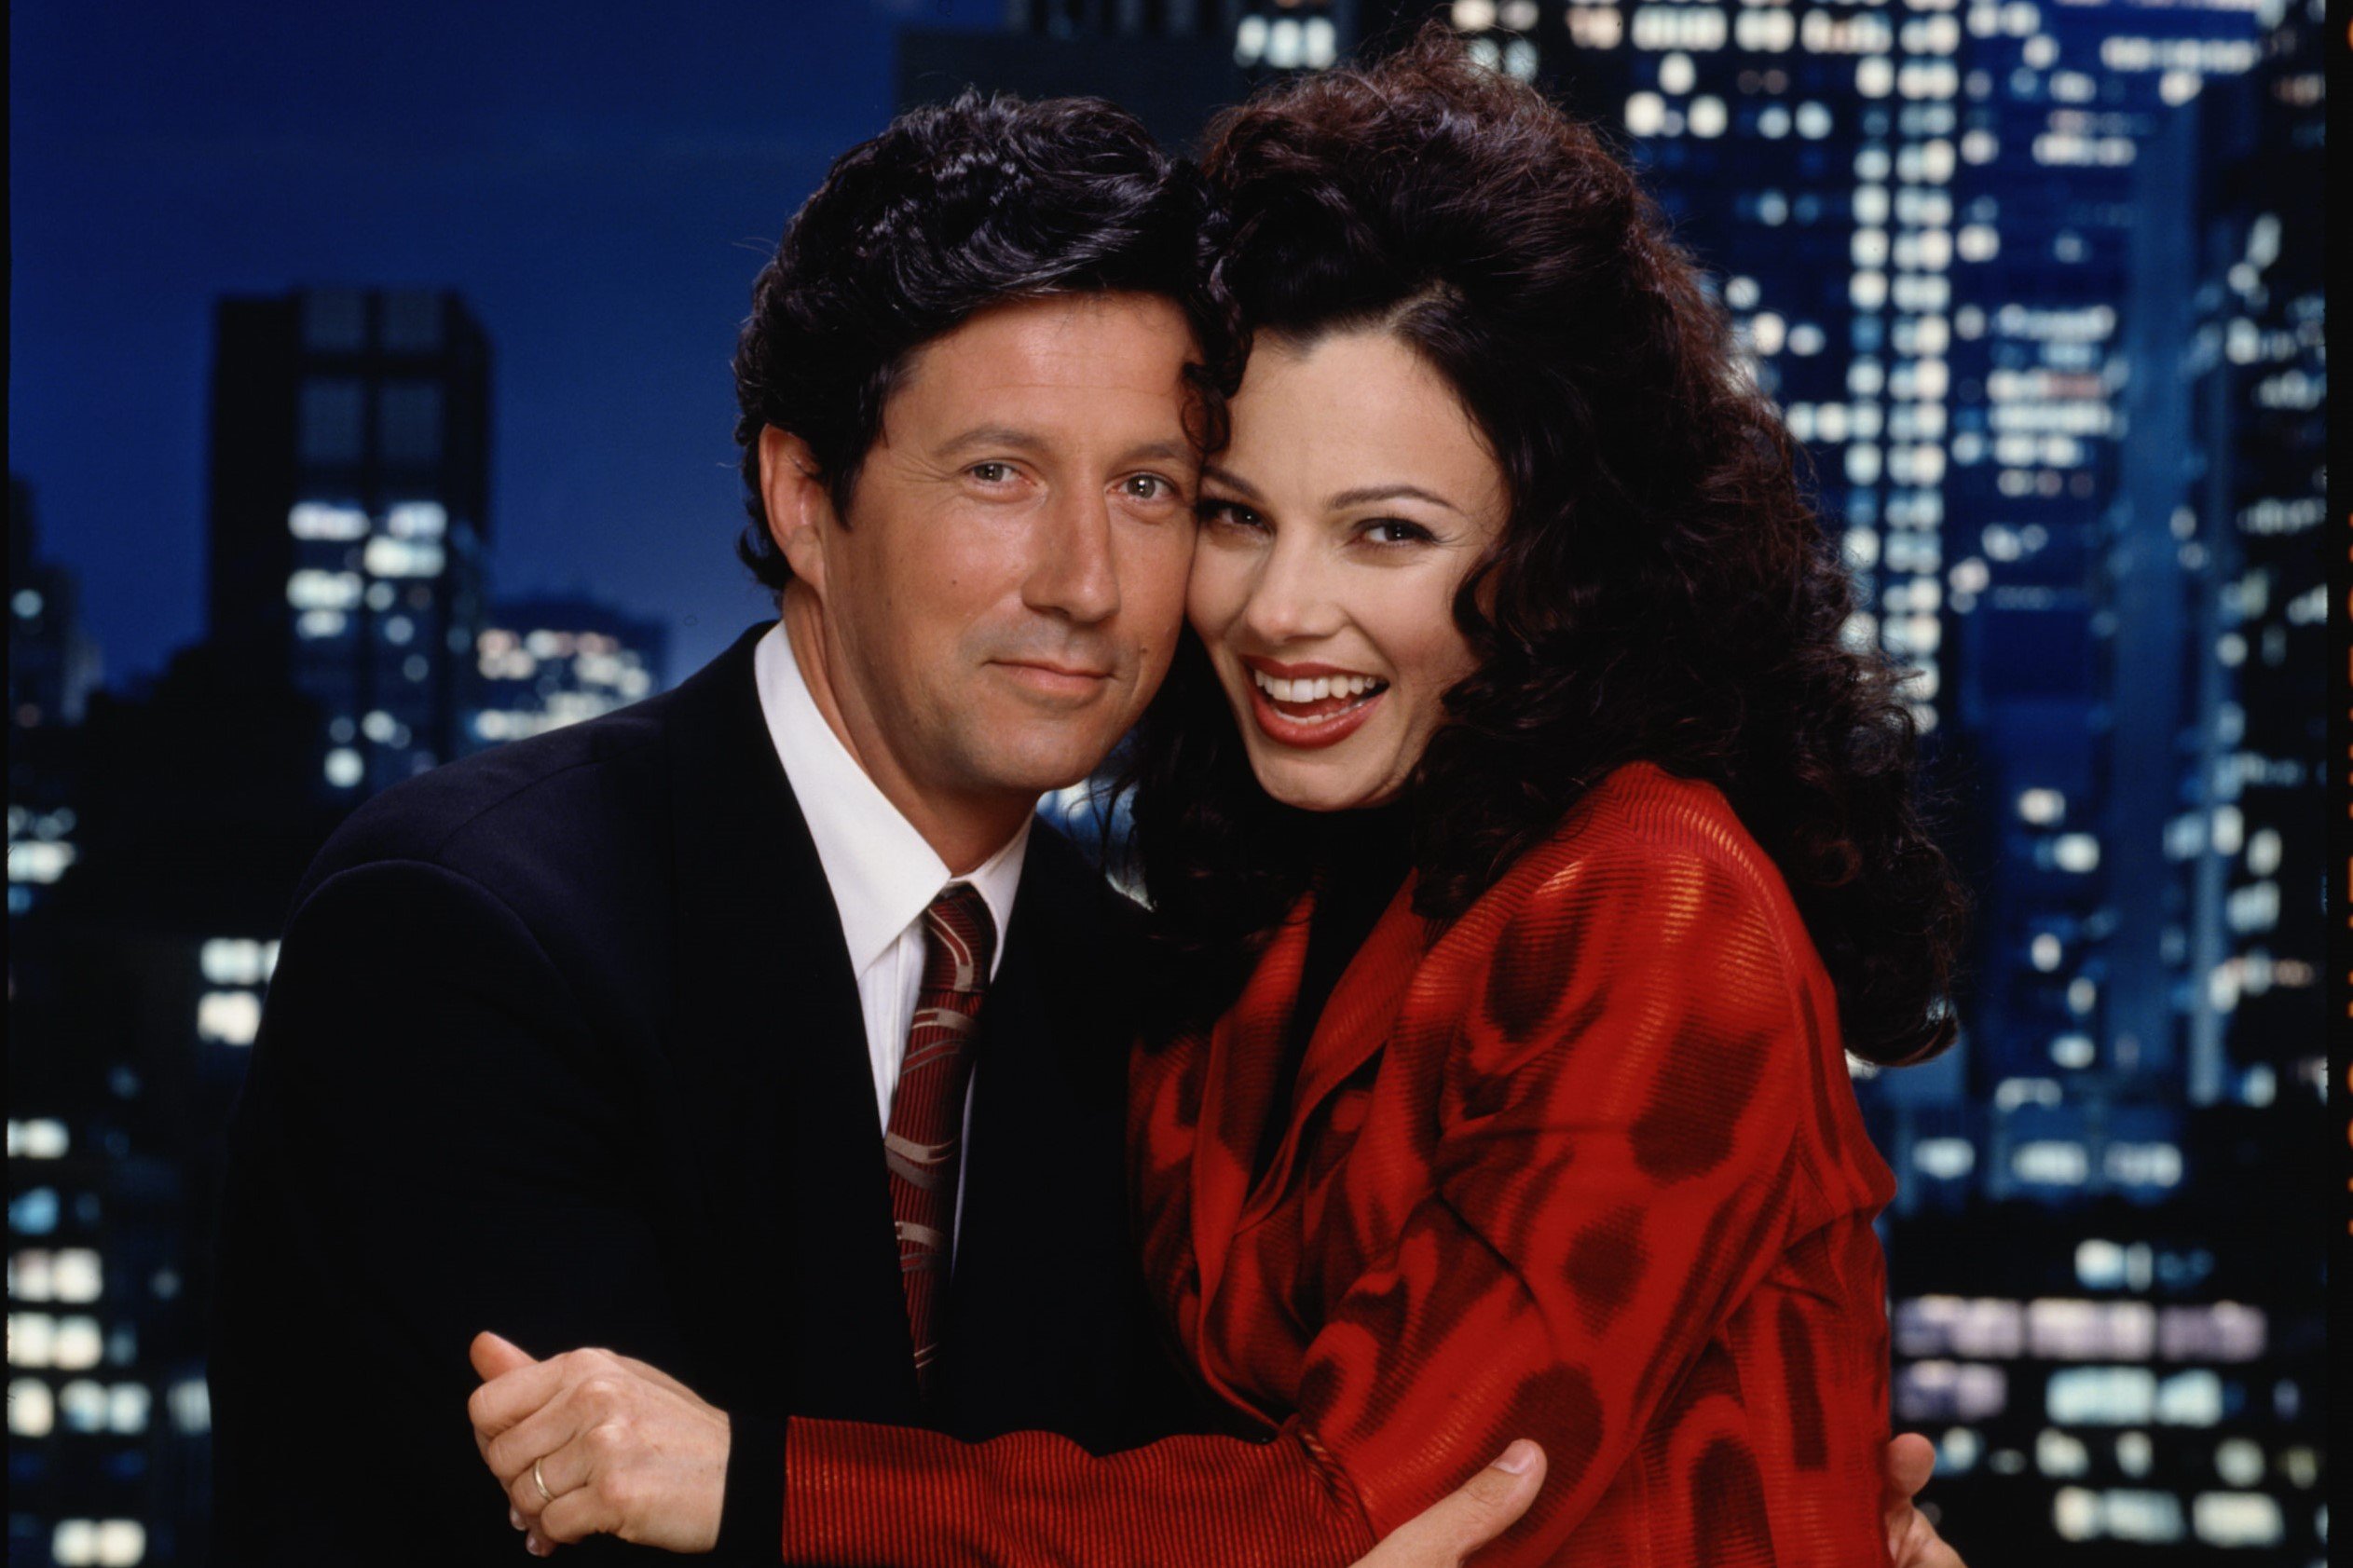 Charles Shaughnessy and Fran Drescher, in character as Maxwell Sheffield and Fran Fine in 'The Nanny,' which aired one Hanukkah episode in season 6.